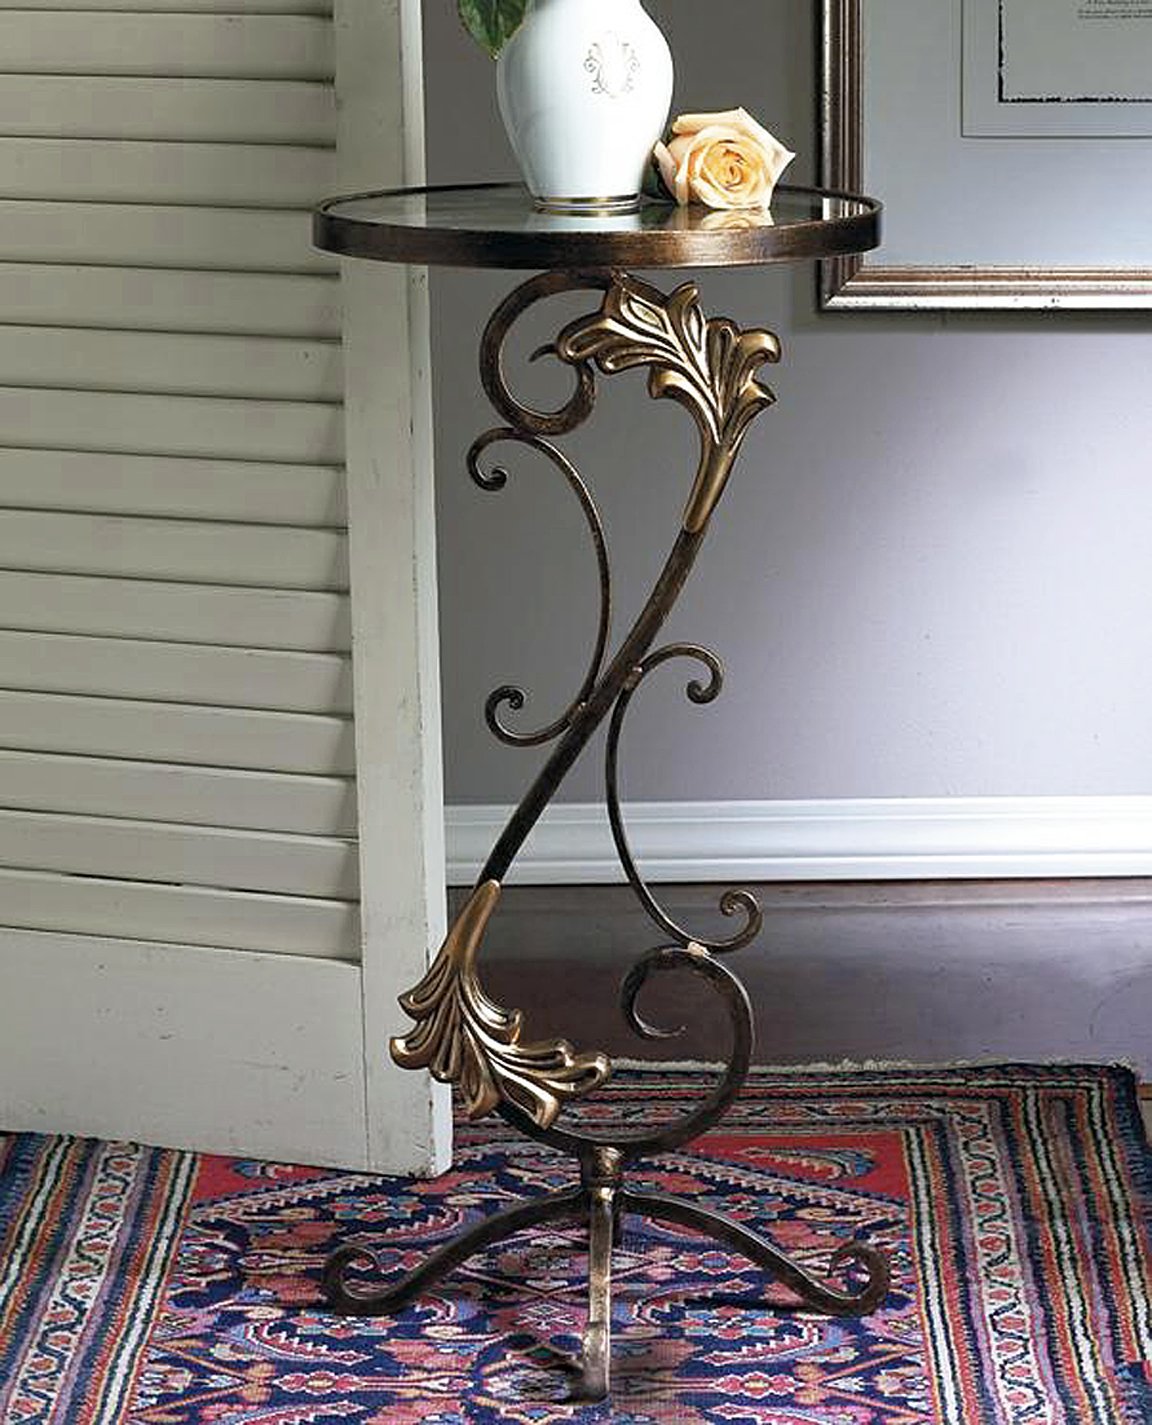 bronze accent table find line antique get quotations furniture florentine garden round iron metal with brass asian lamps pads office wall cabinets black kitchen chairs wooden